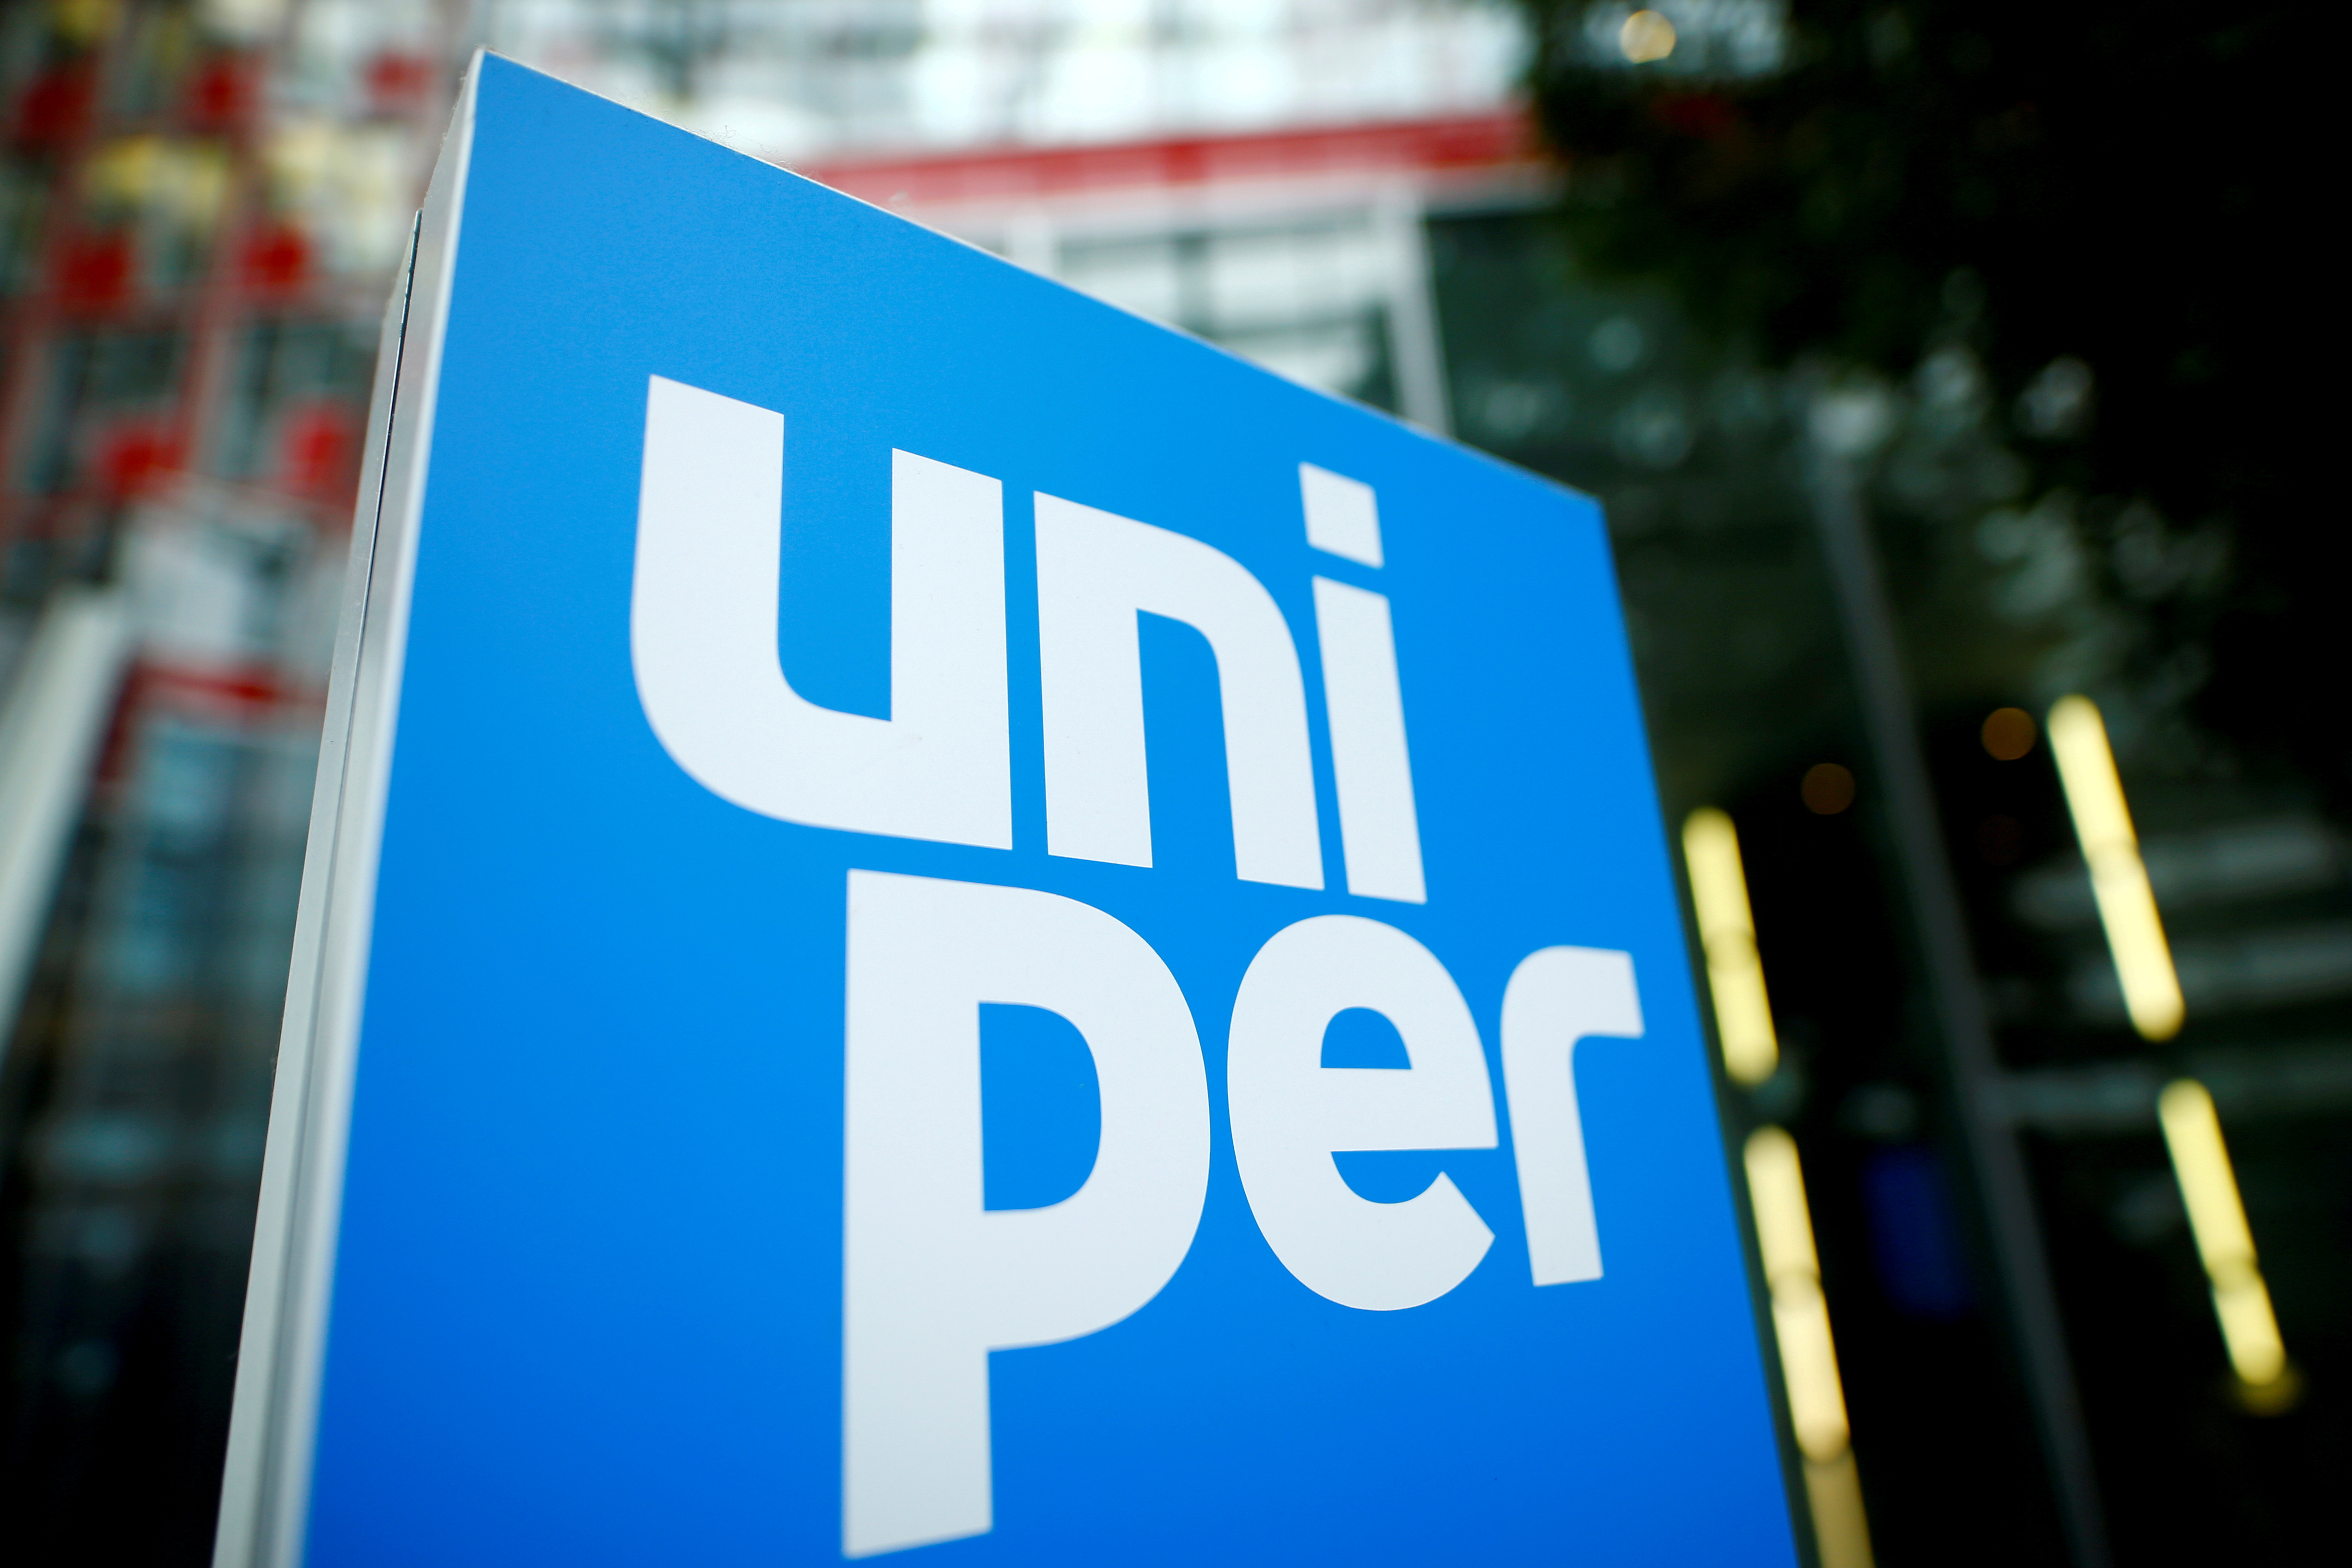 The logo of German energy utility company Uniper SE is pictured in the company's headquarters in Duesseldorf, Germany, March 10, 2020. REUTERS/Thilo Schmuelgen/File Photo